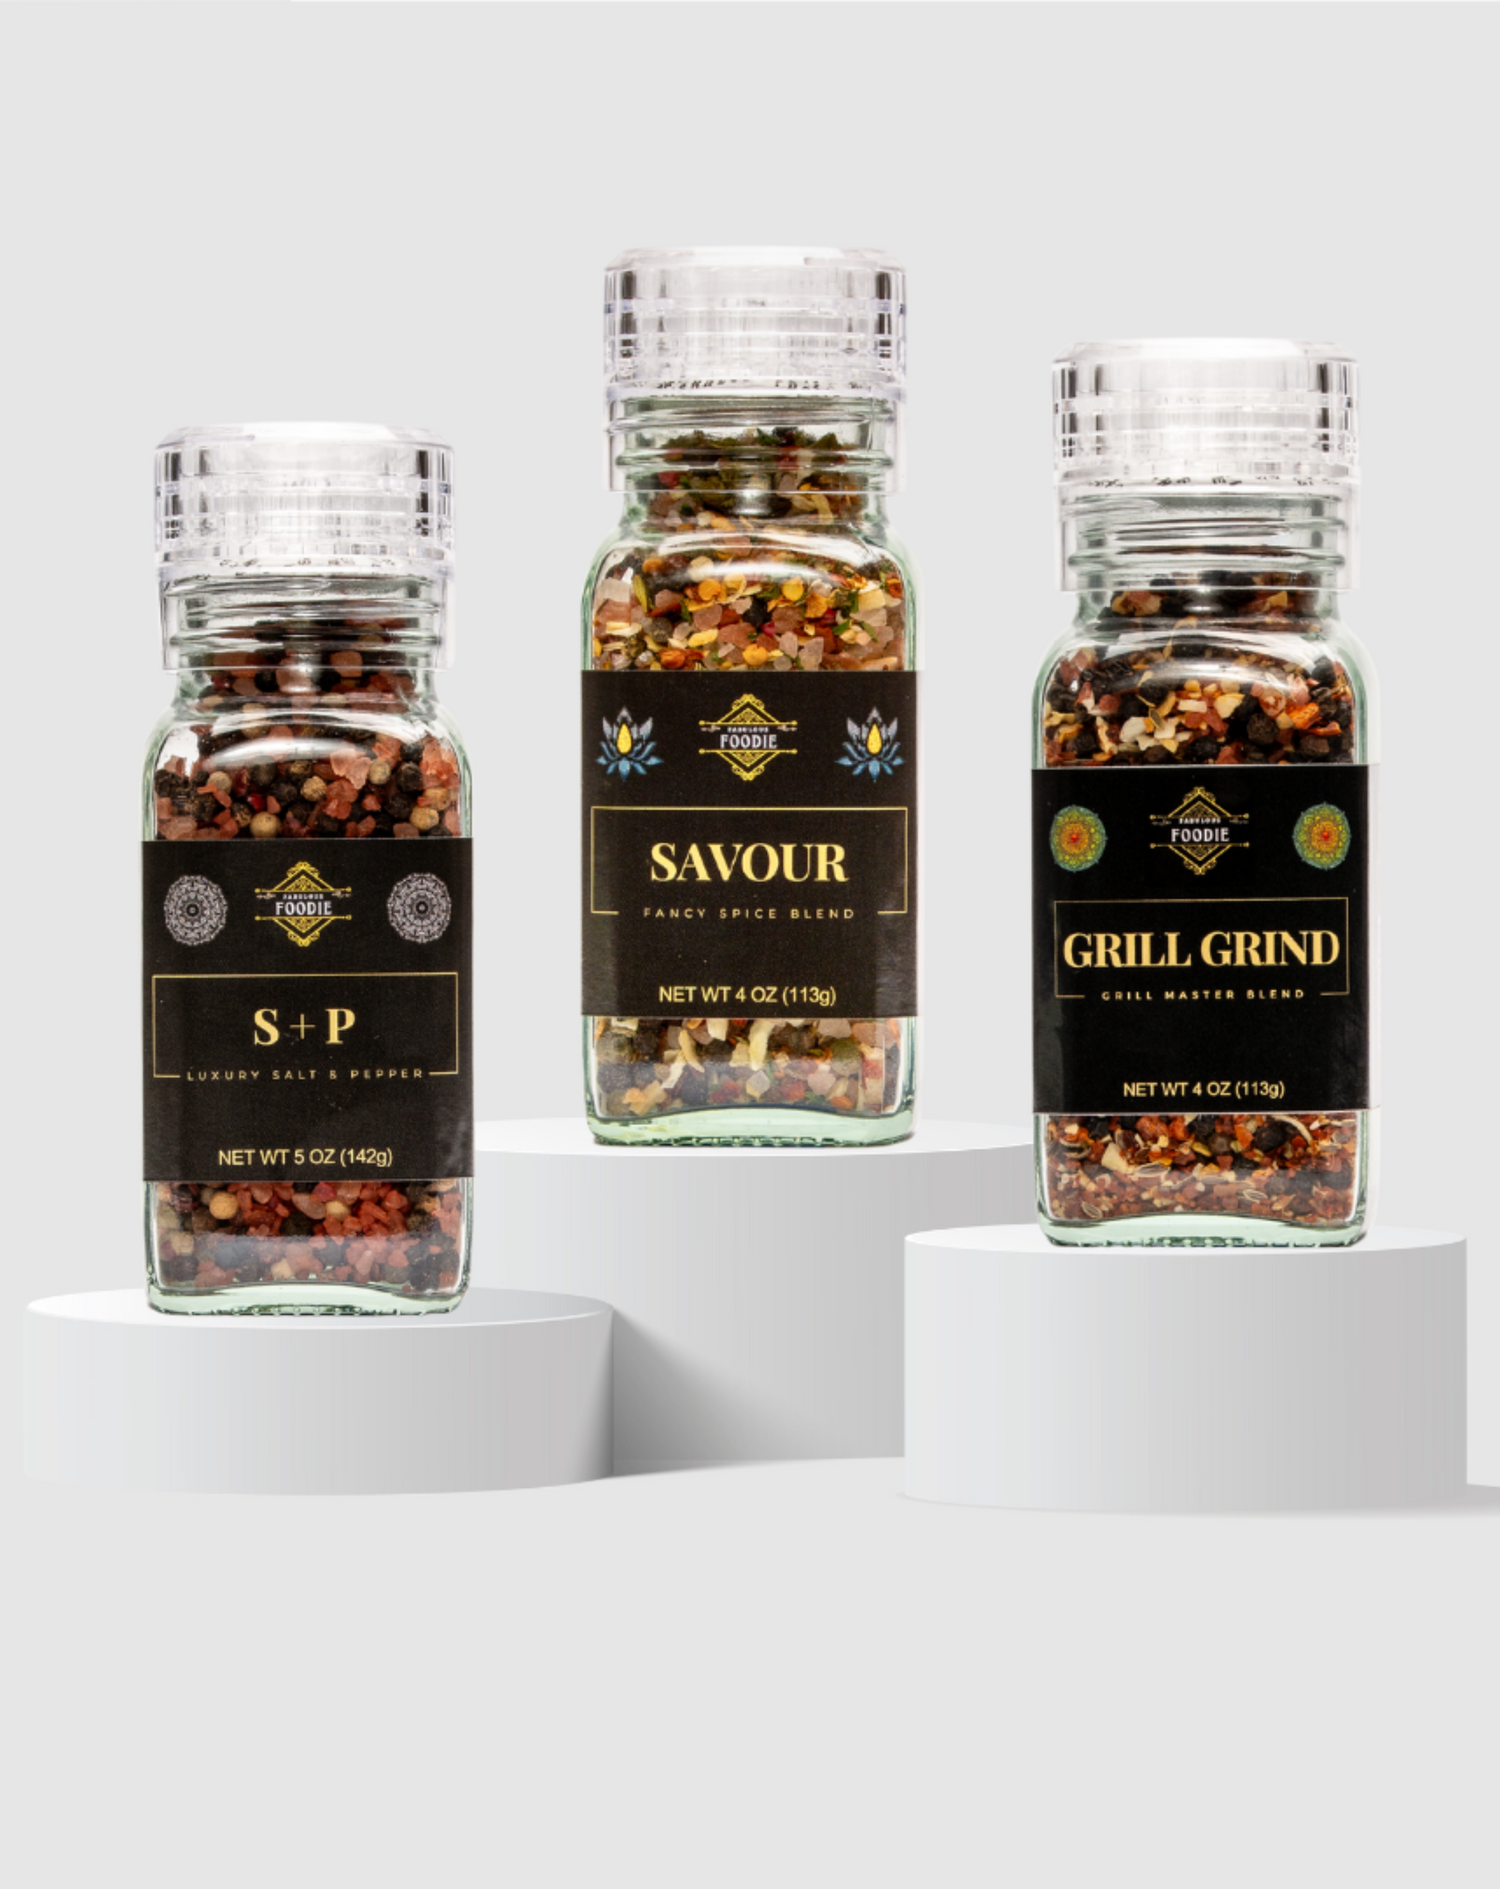 3 Luxury Spice Grinders: S+P, Savour, and Grill Grind